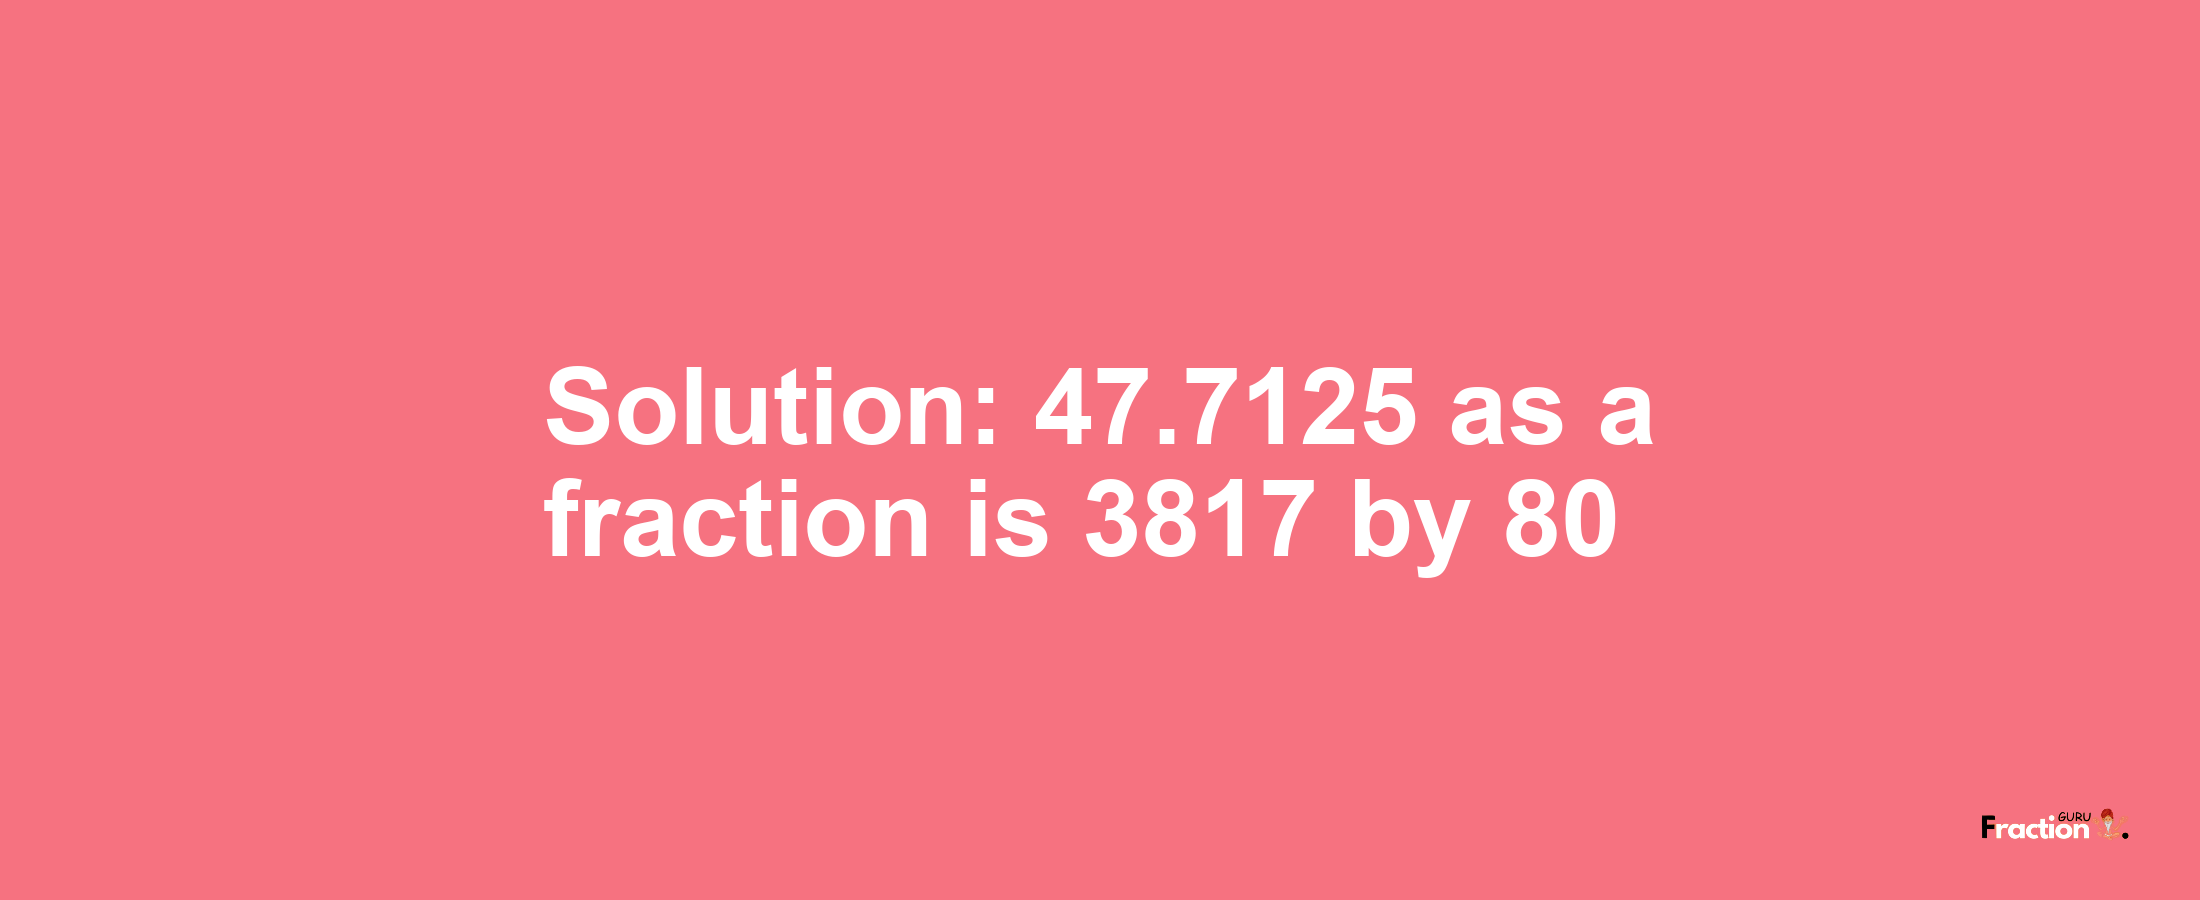 Solution:47.7125 as a fraction is 3817/80